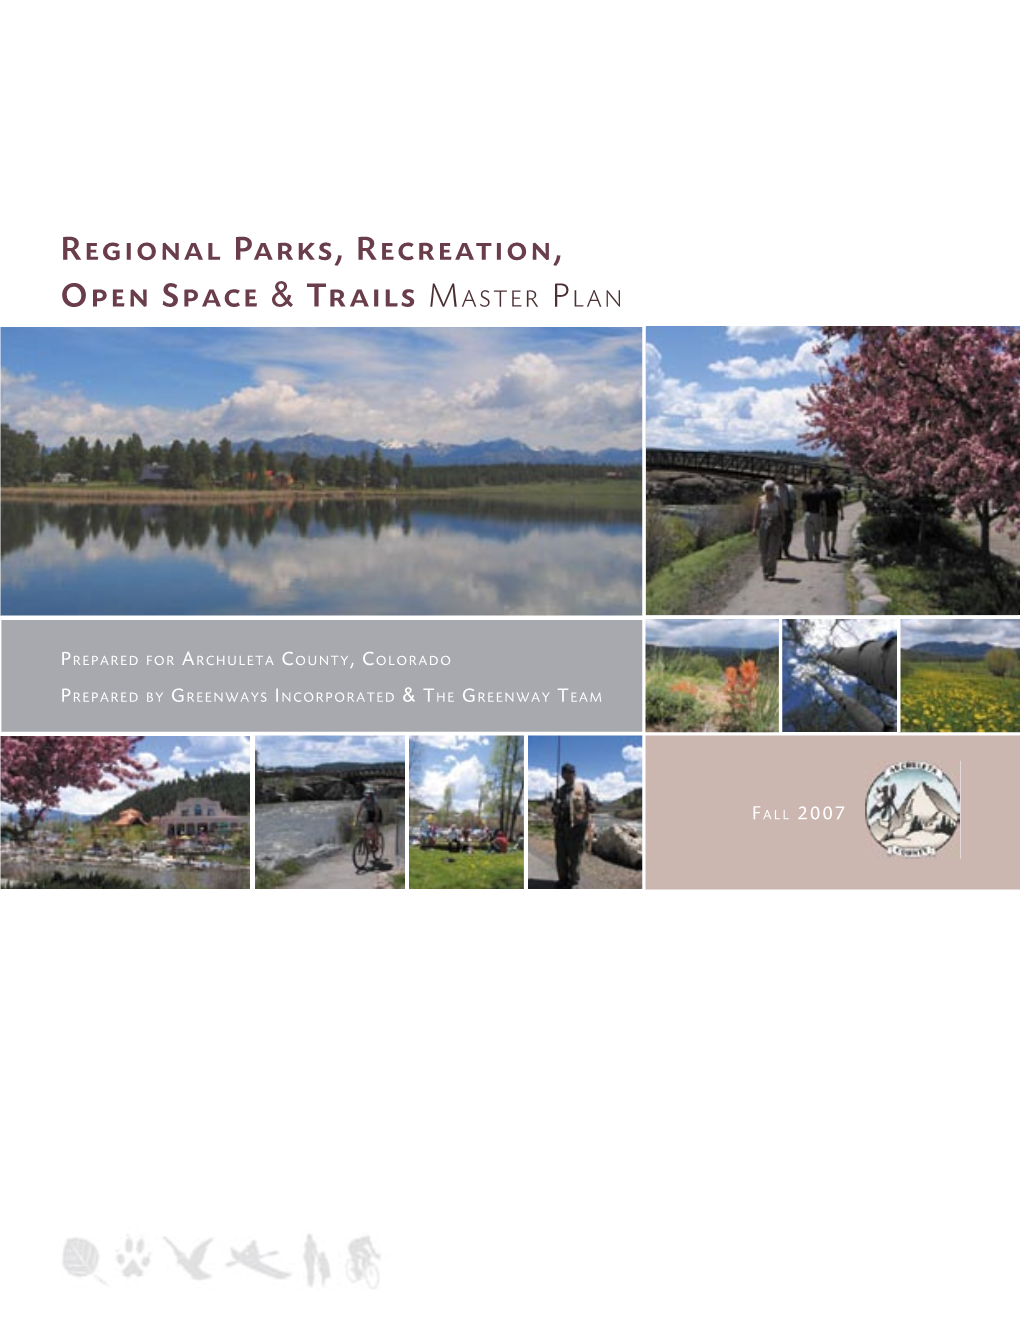 Parks, Recreation, Open Space and Trails Master Plan